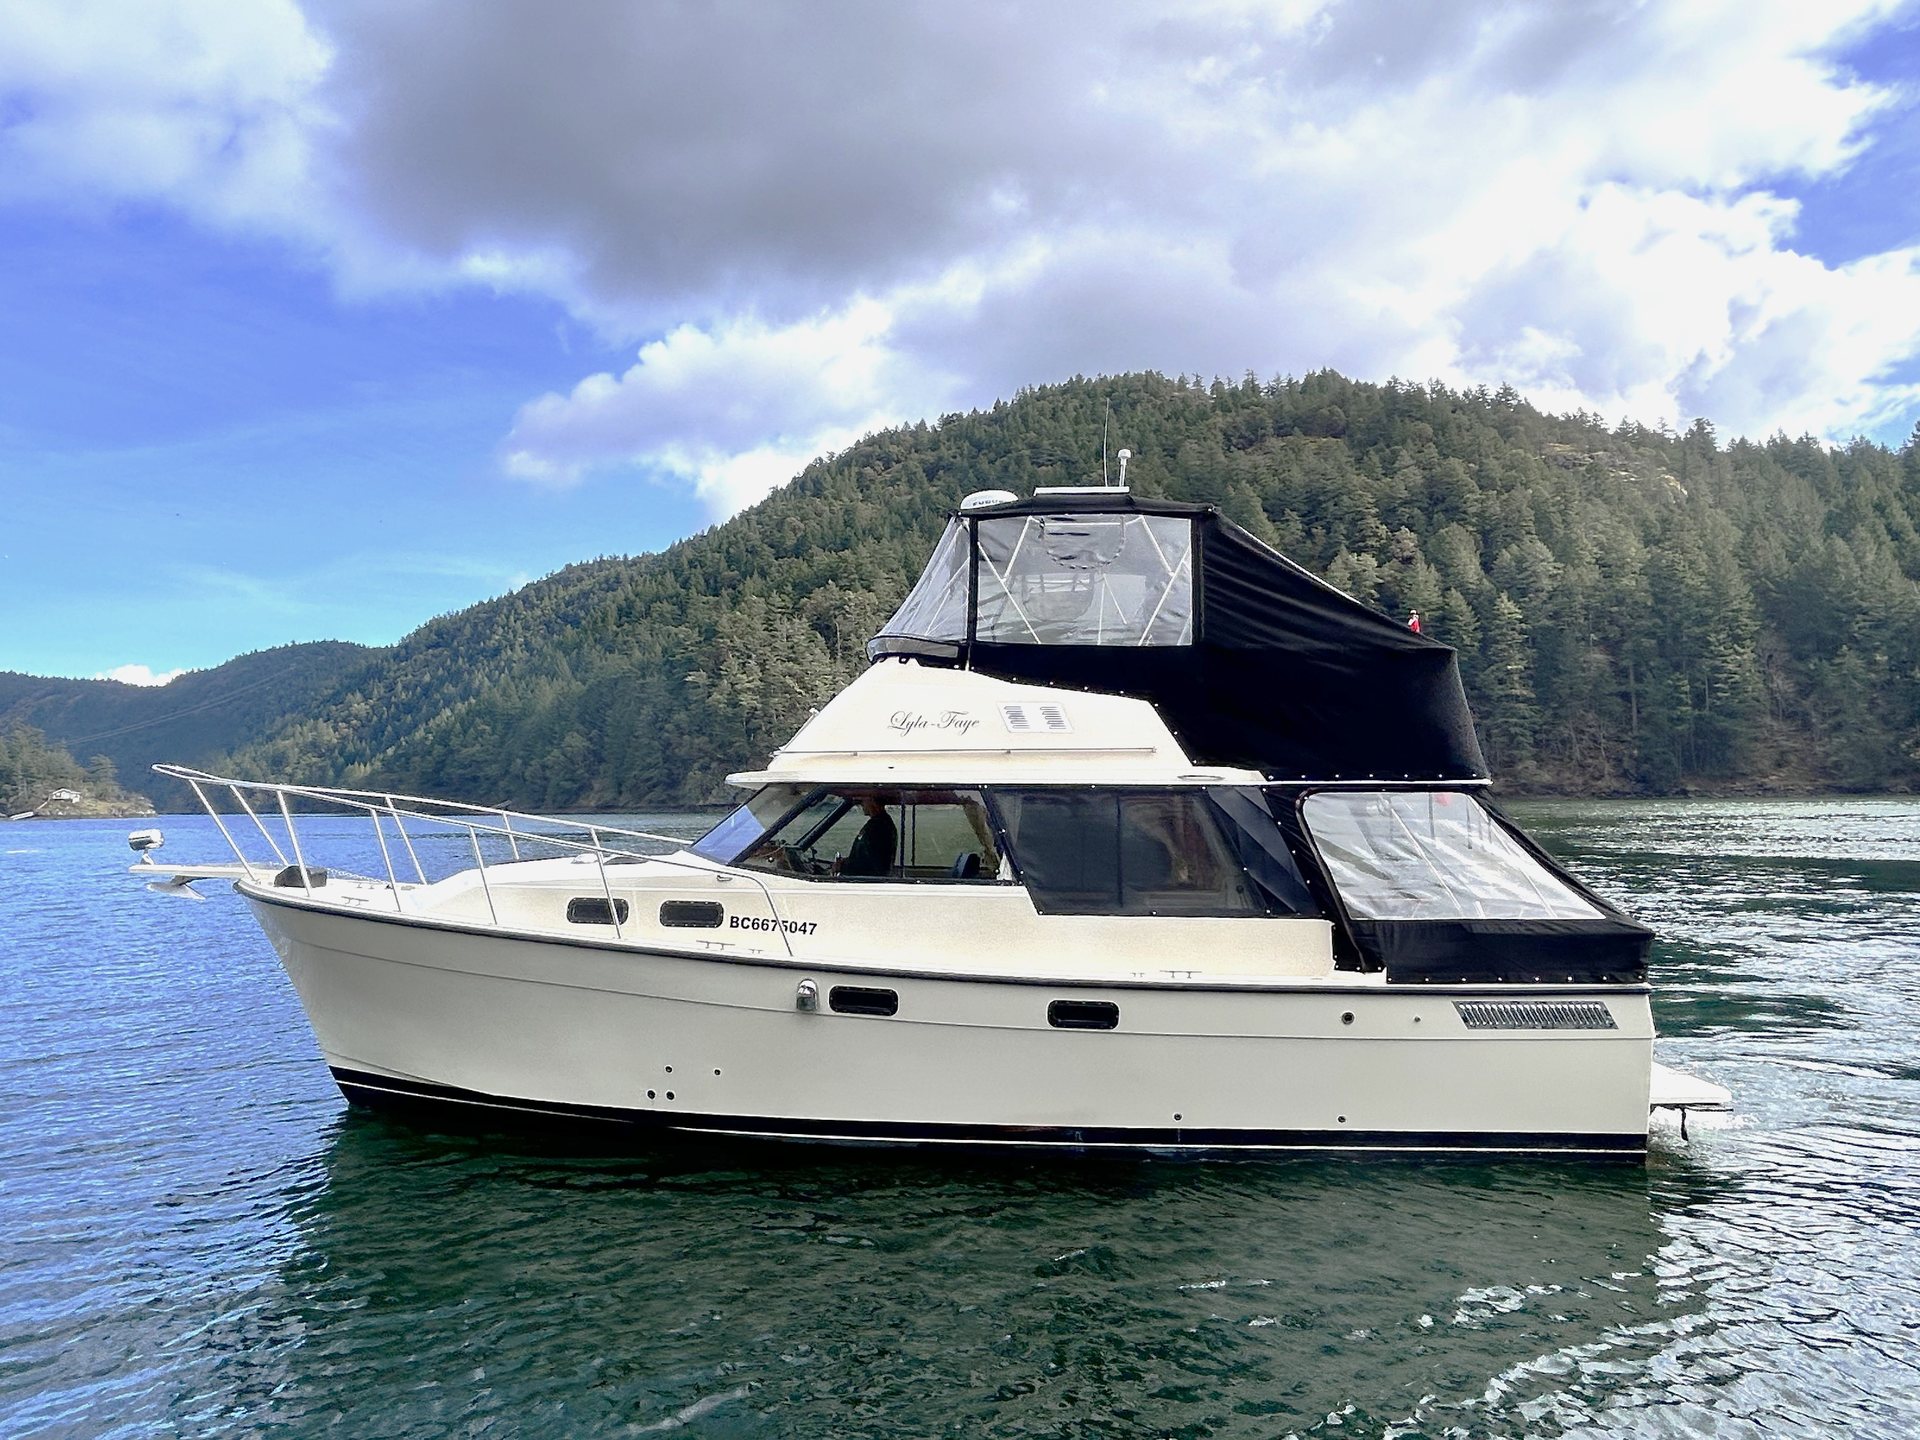 360 VR Virtual Tours of the Bayliner 3270